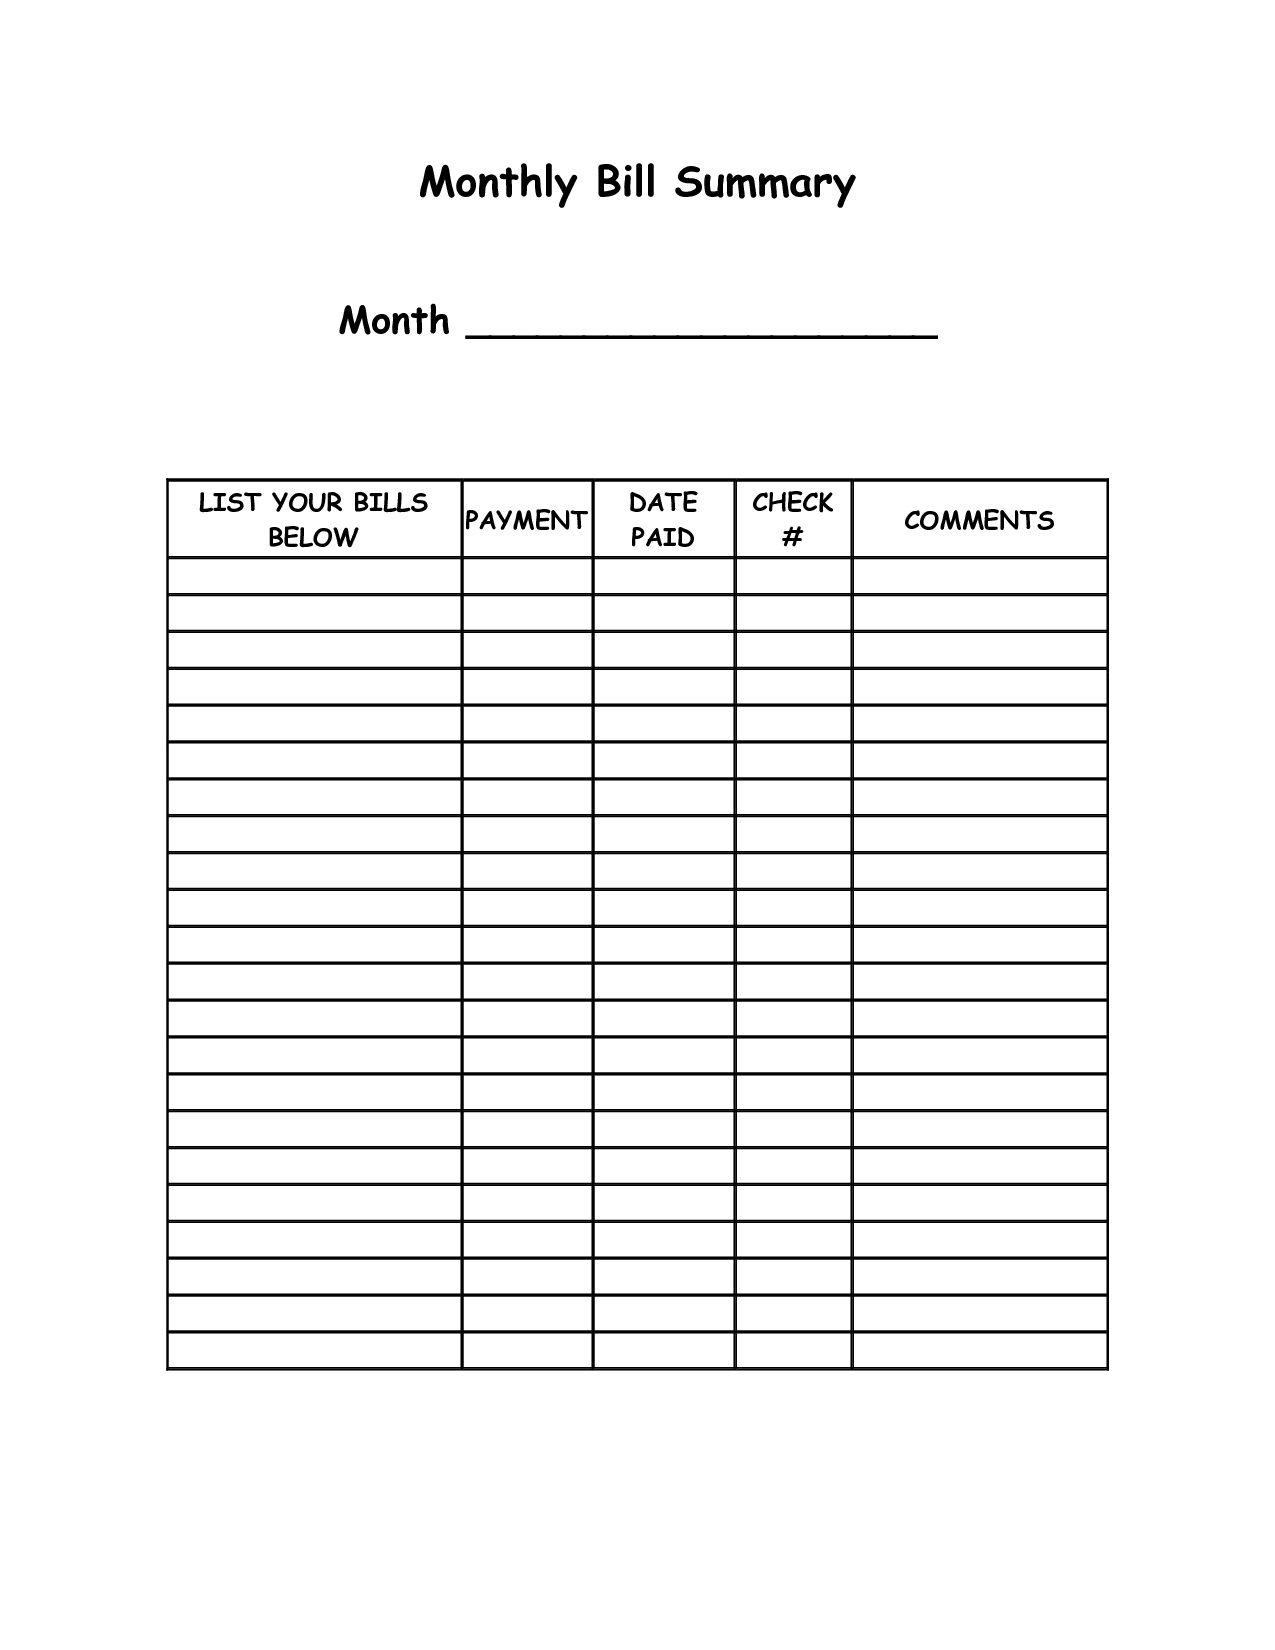 Monthly Bill Summary Doc | Organization | Organizing Monthly-Blank Monthly Bill Payment Worksheet